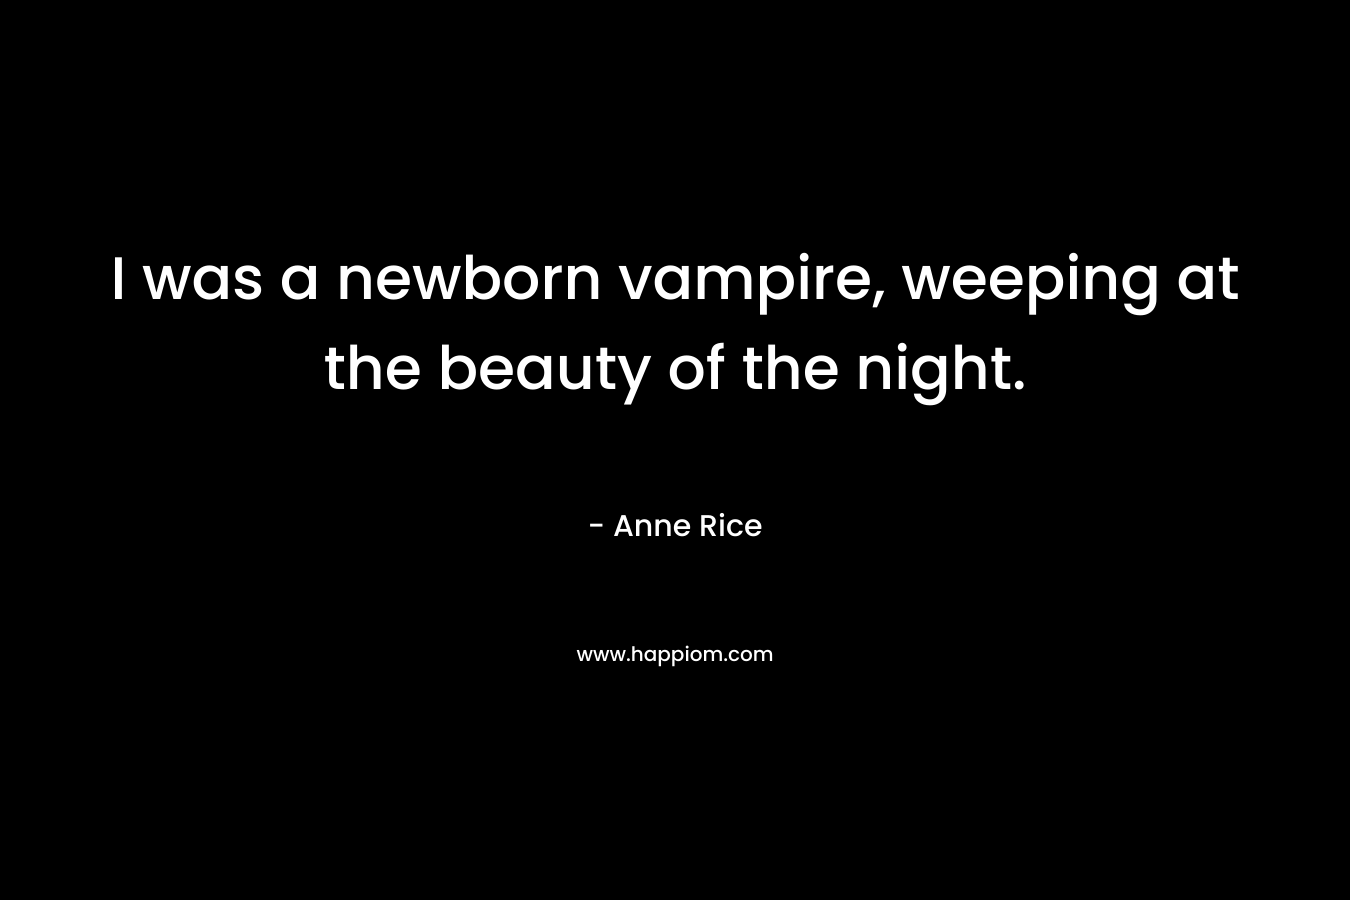 I was a newborn vampire, weeping at the beauty of the night. – Anne Rice